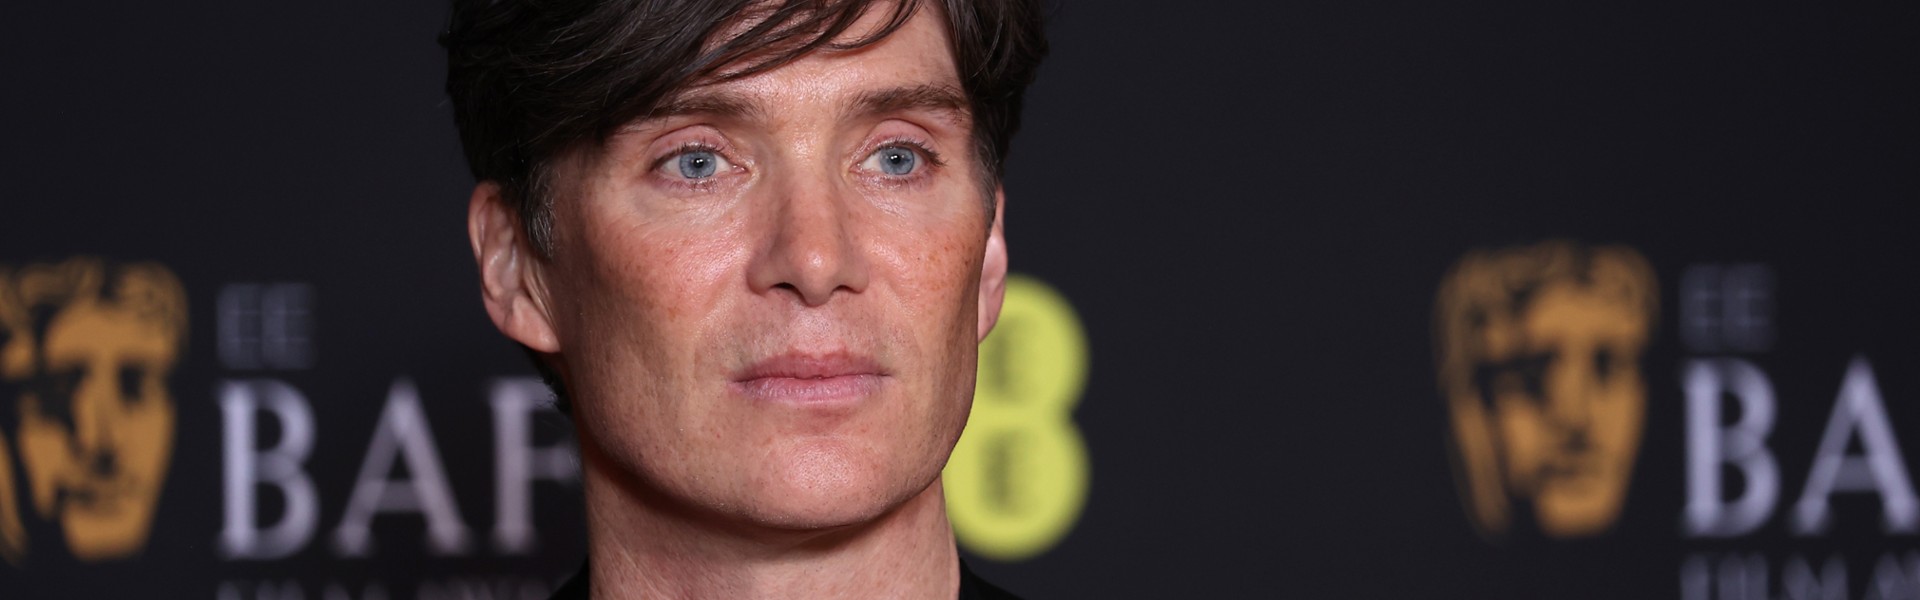 Cillian Murphy has a new project. “Blood Runs Coal” is a fact-based thriller